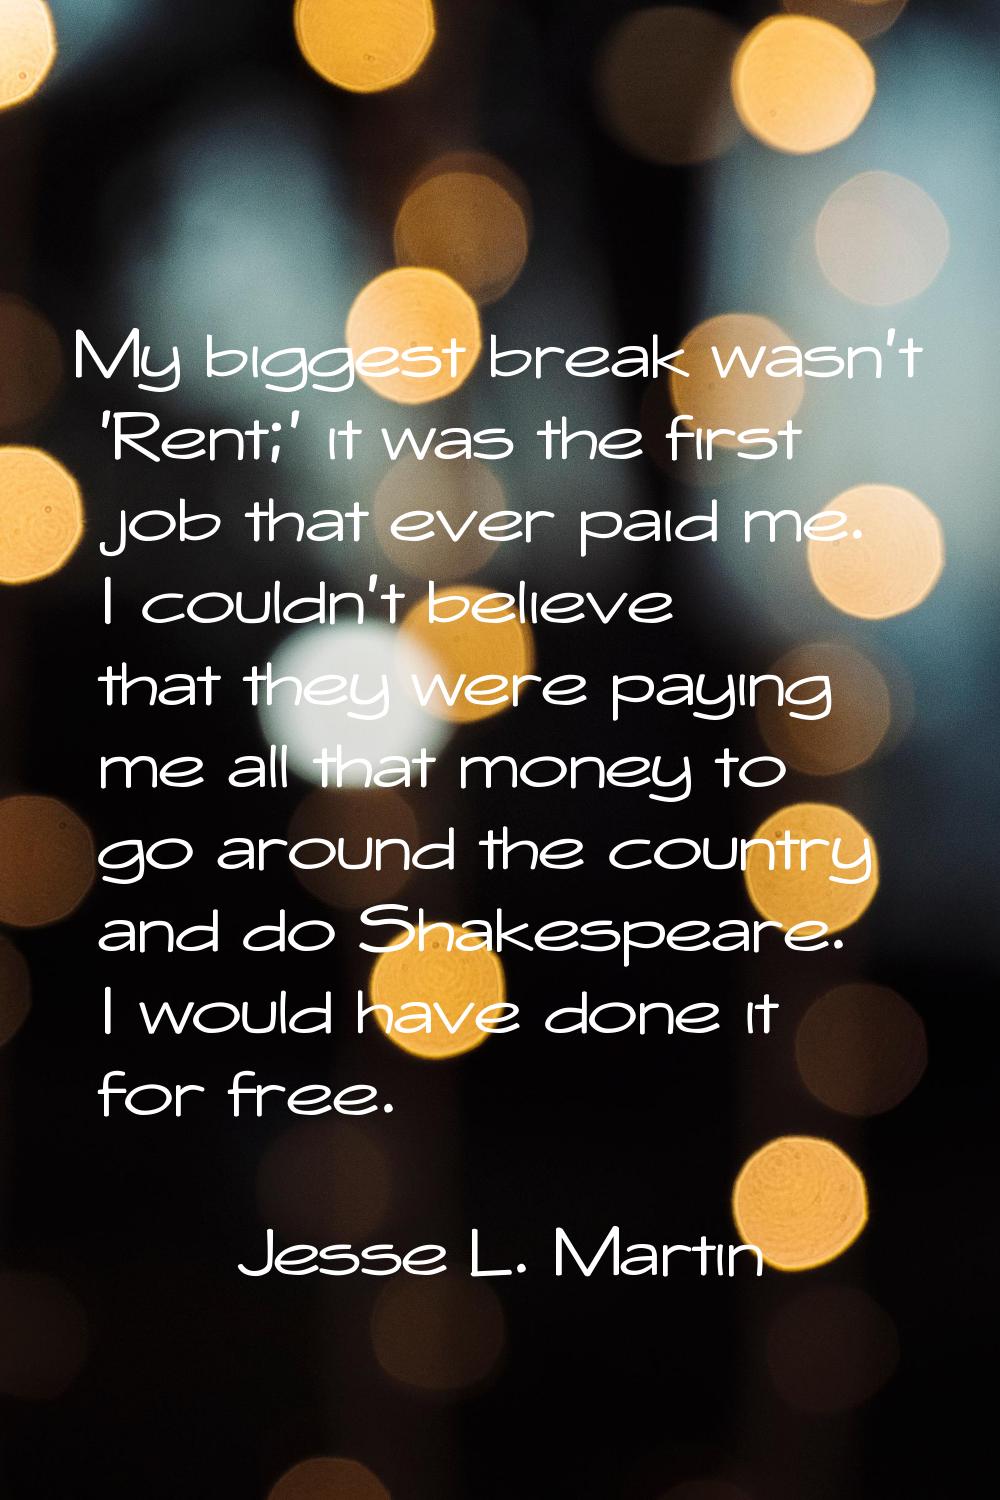 My biggest break wasn't 'Rent;' it was the first job that ever paid me. I couldn't believe that the